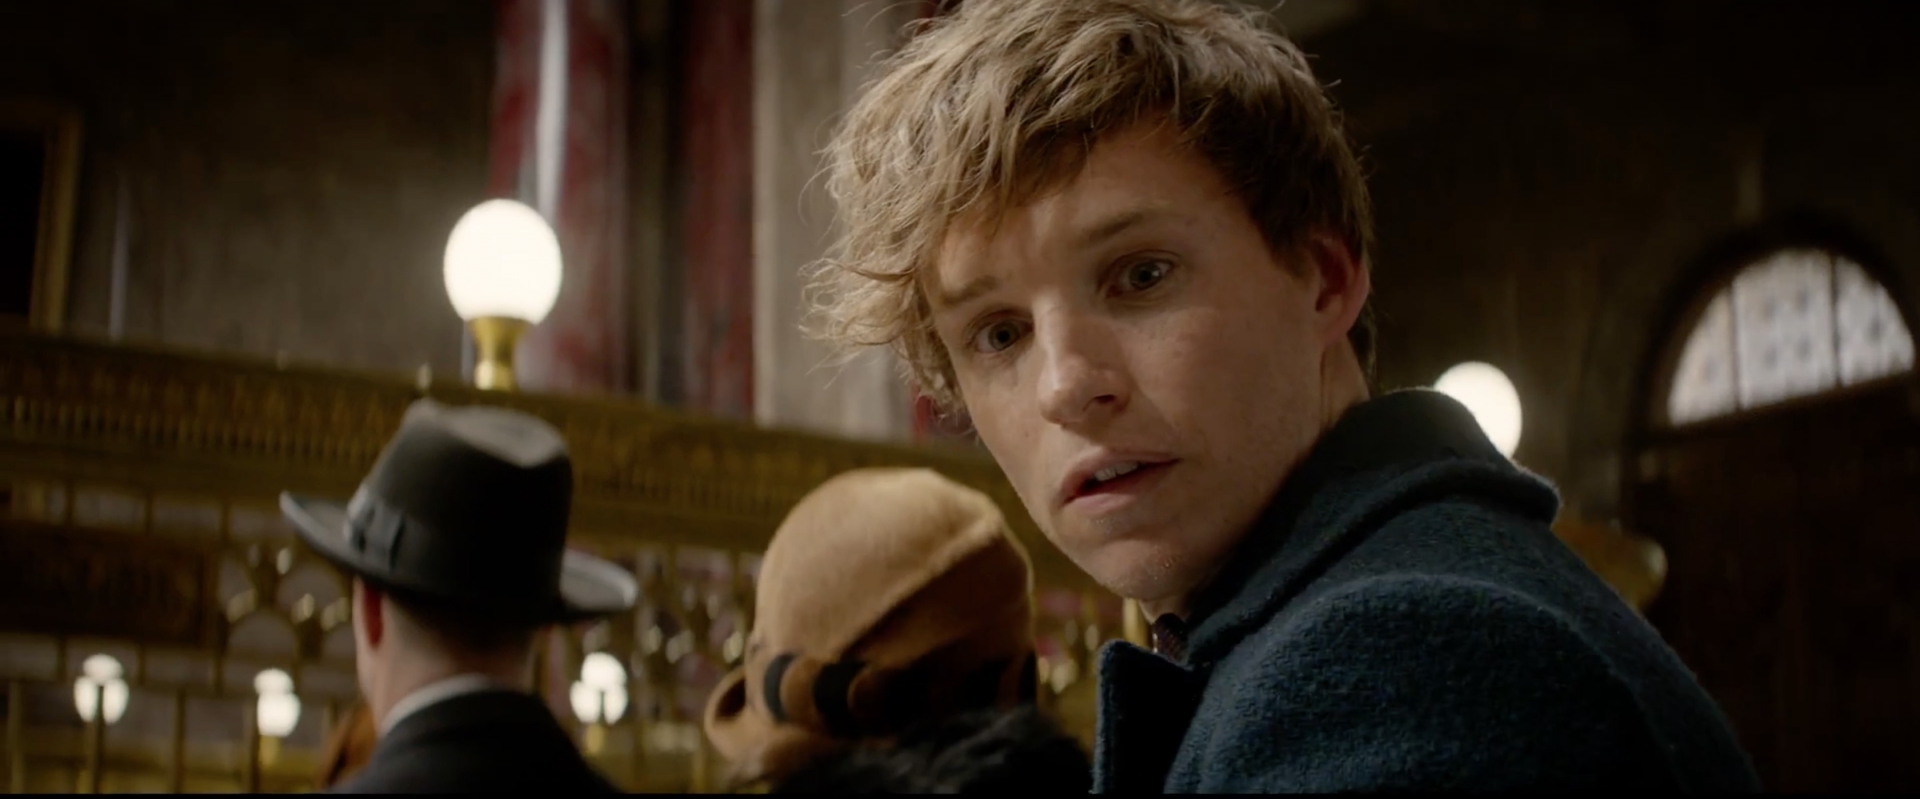 Fantastic Beasts And Where To Find Them Full-Length Movie 2016 Online